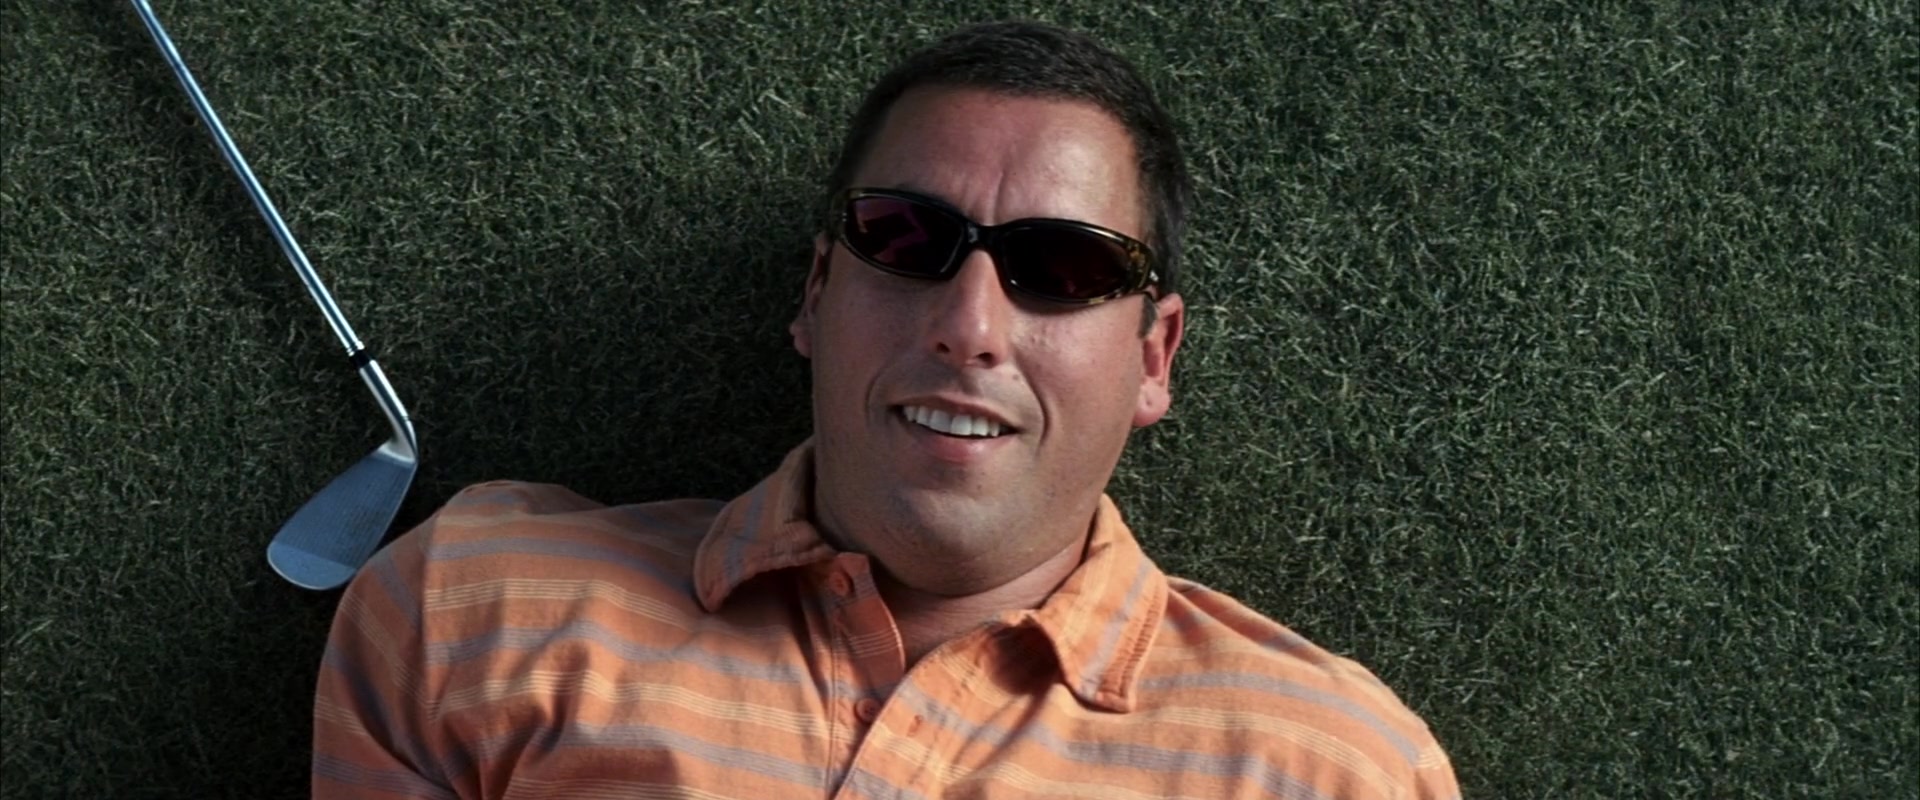 Dso Sunglasses Of Adam Sandler As Henry Roth In 50 First Dates 04